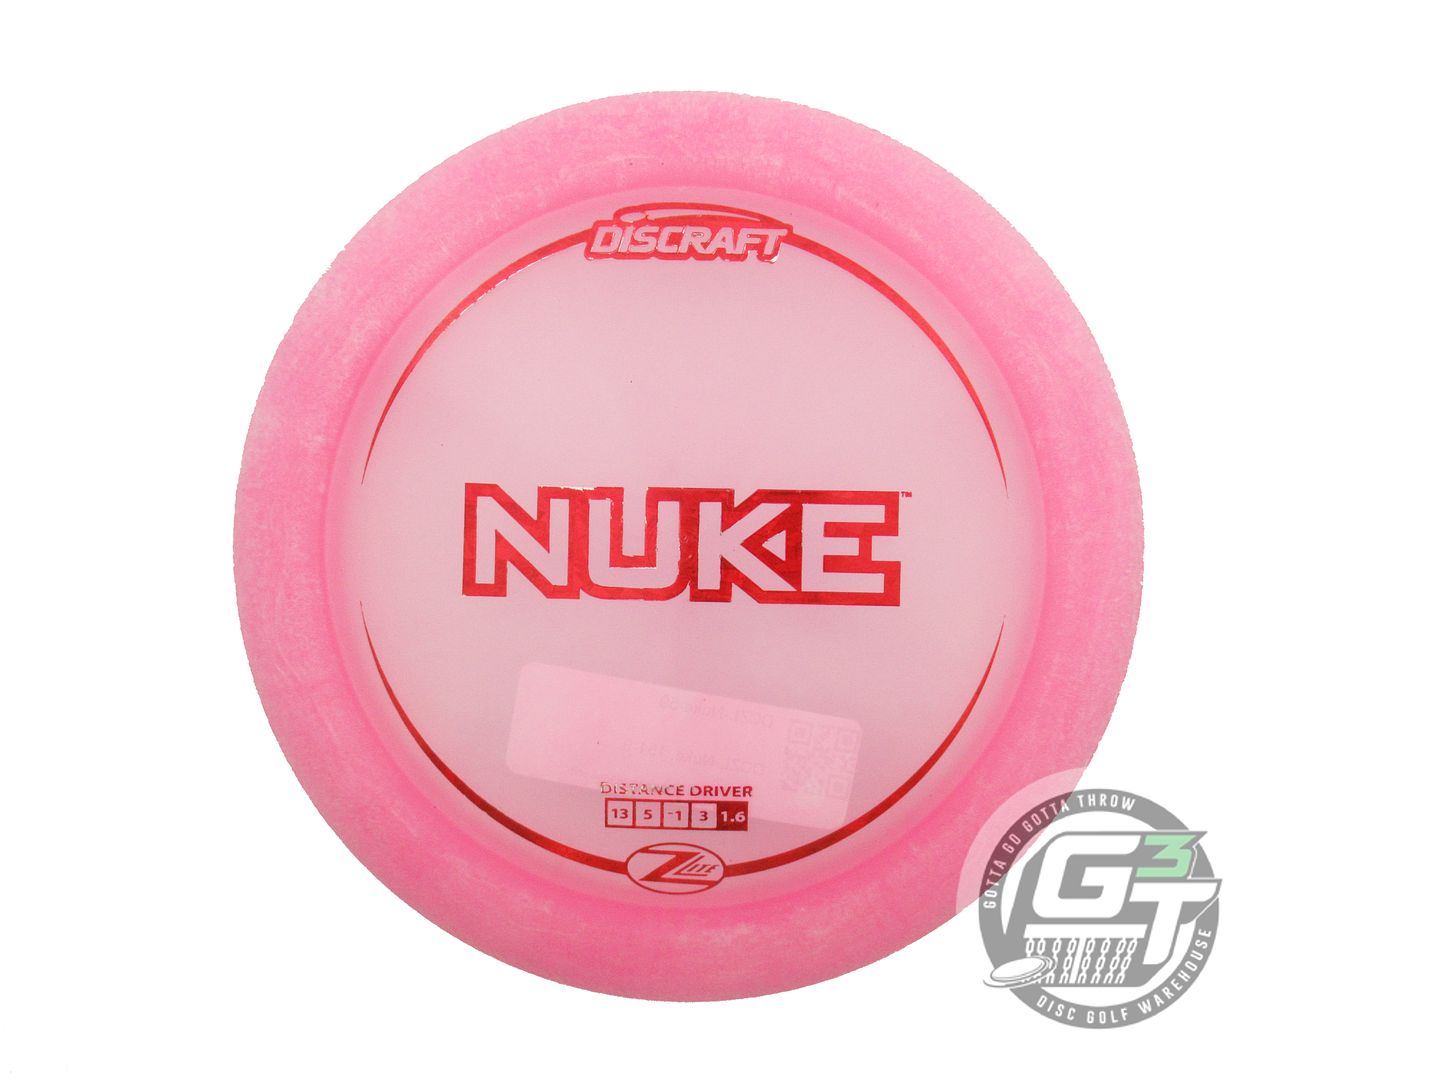 Discraft Z Lite Nuke Distance Driver Golf Disc (Individually Listed)